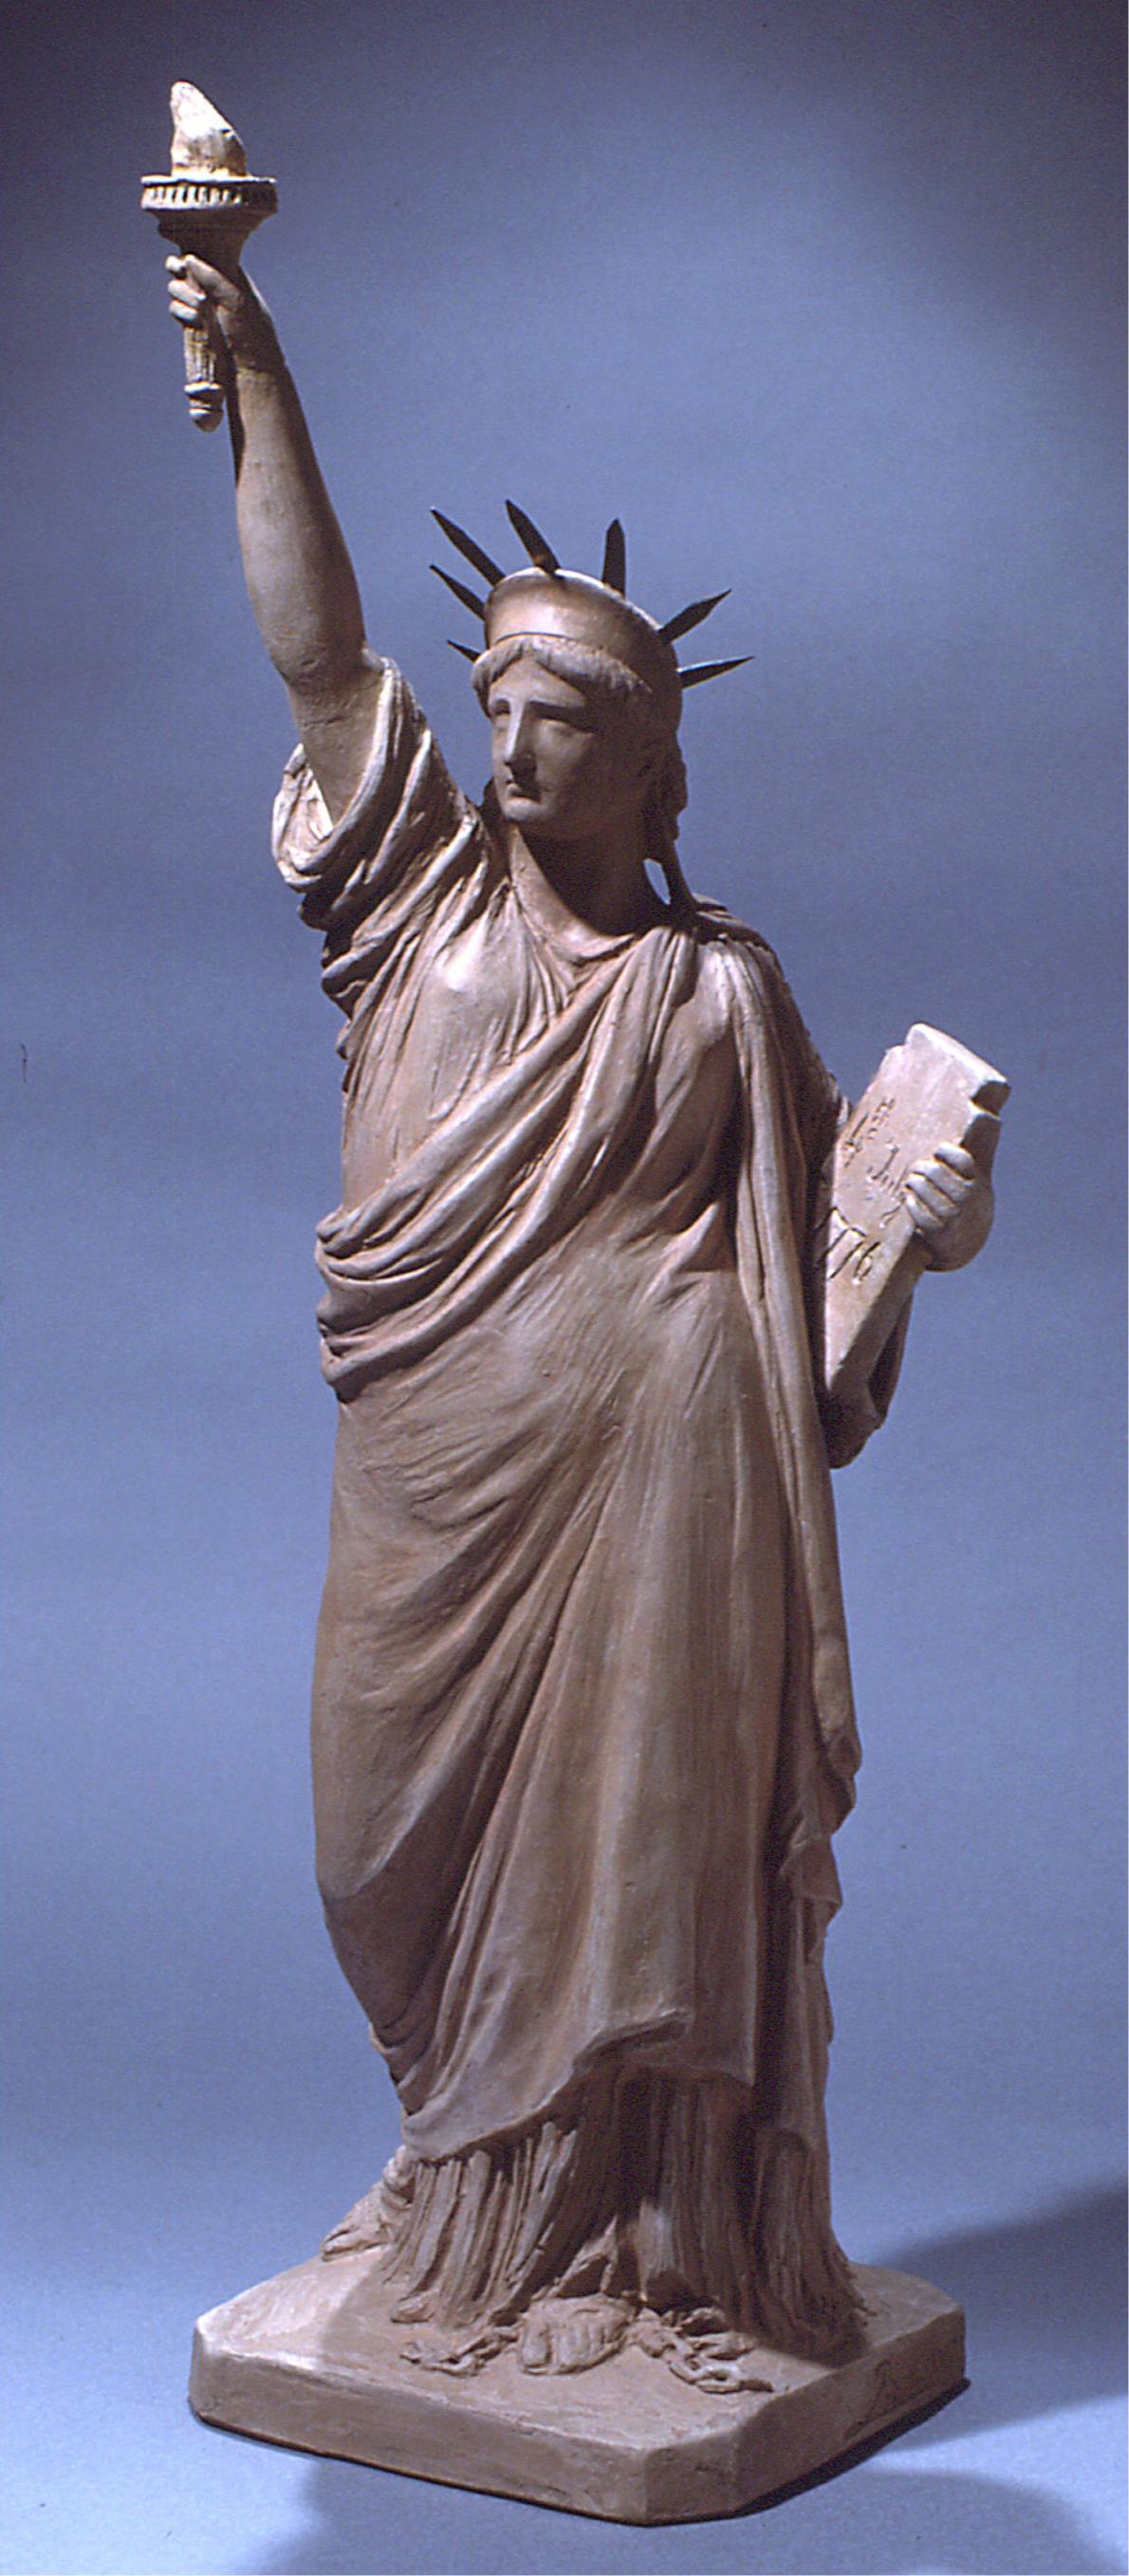 Maquette of the Statue of Liberty 

